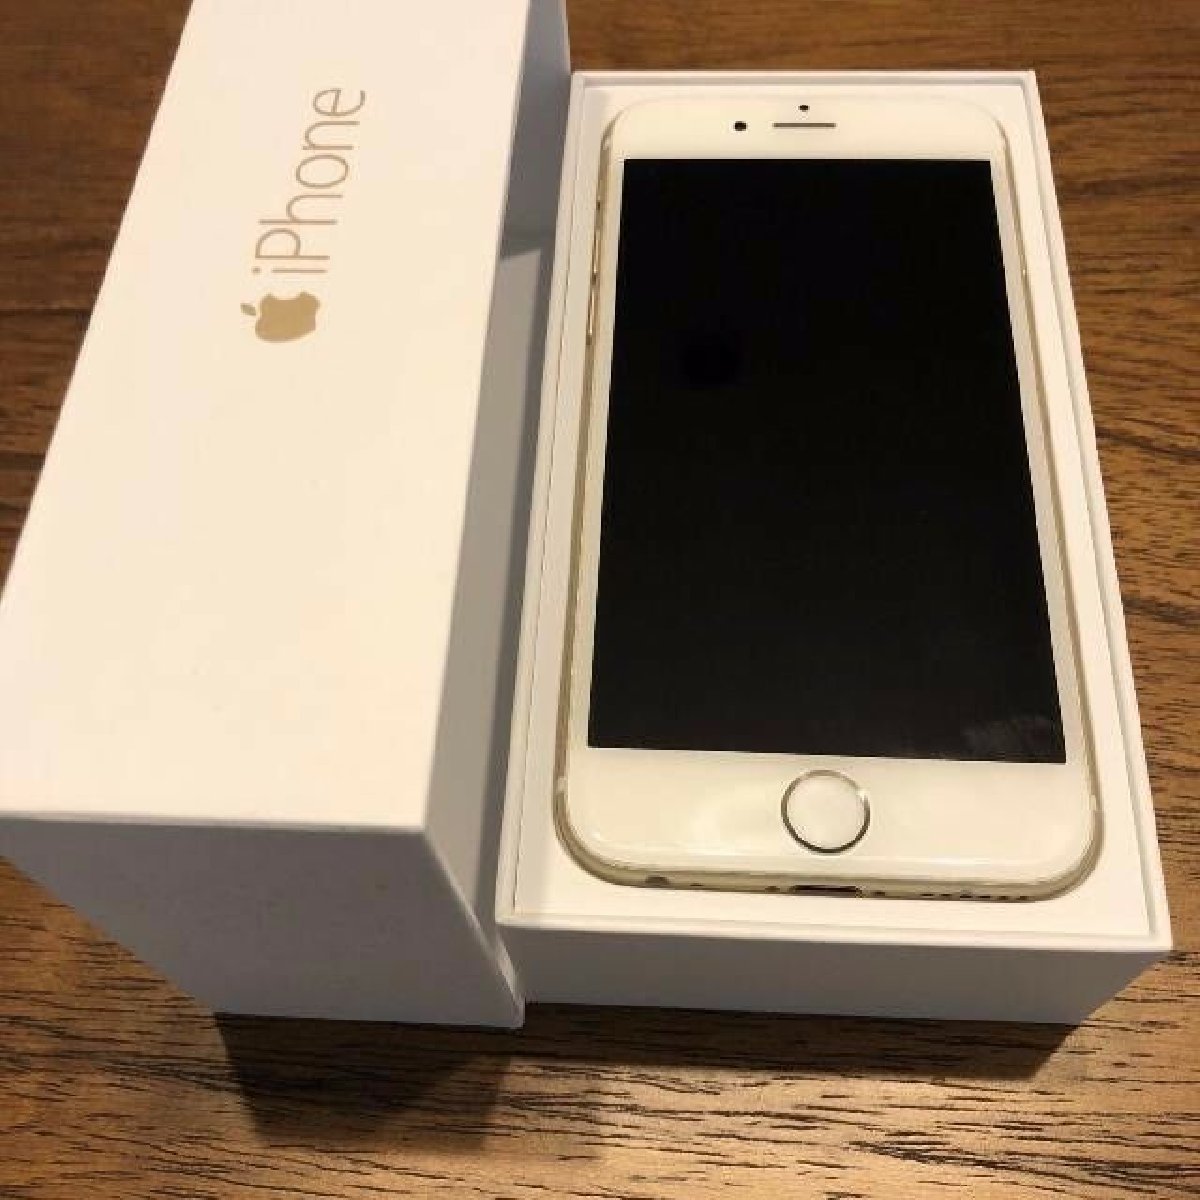 Apple Iphone 6 64gb Gold For Sale In Portland St Mary Phones